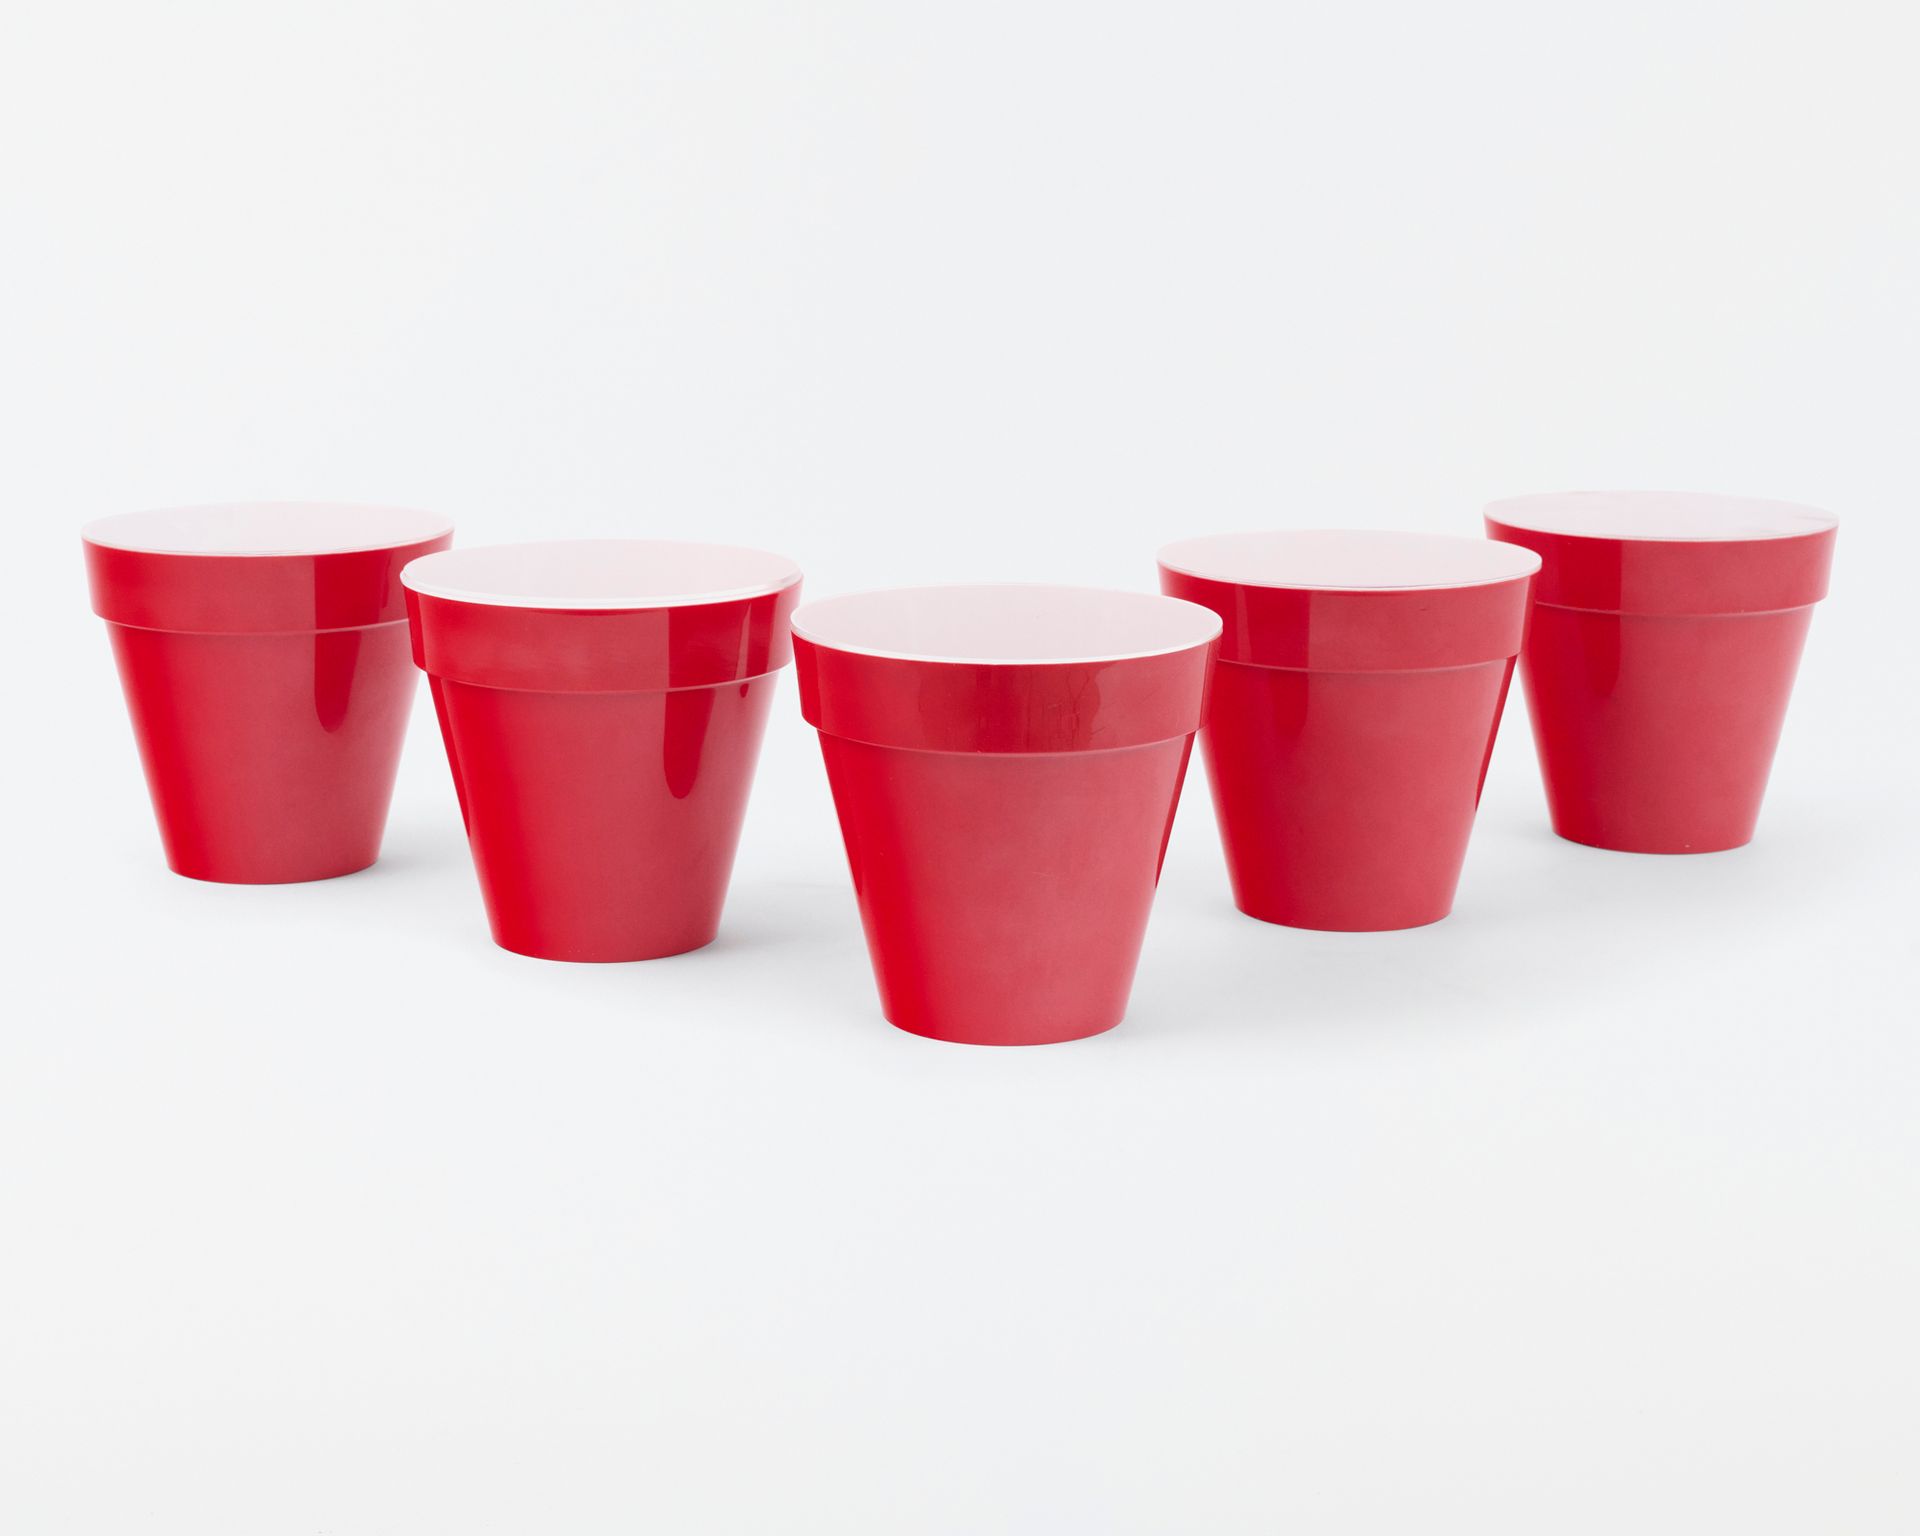 Null Jean-Pierre RAYNAUD
(b. 1939)
Archetype PVC, 1970.
Set of 5 red pots
in PVC&hellip;